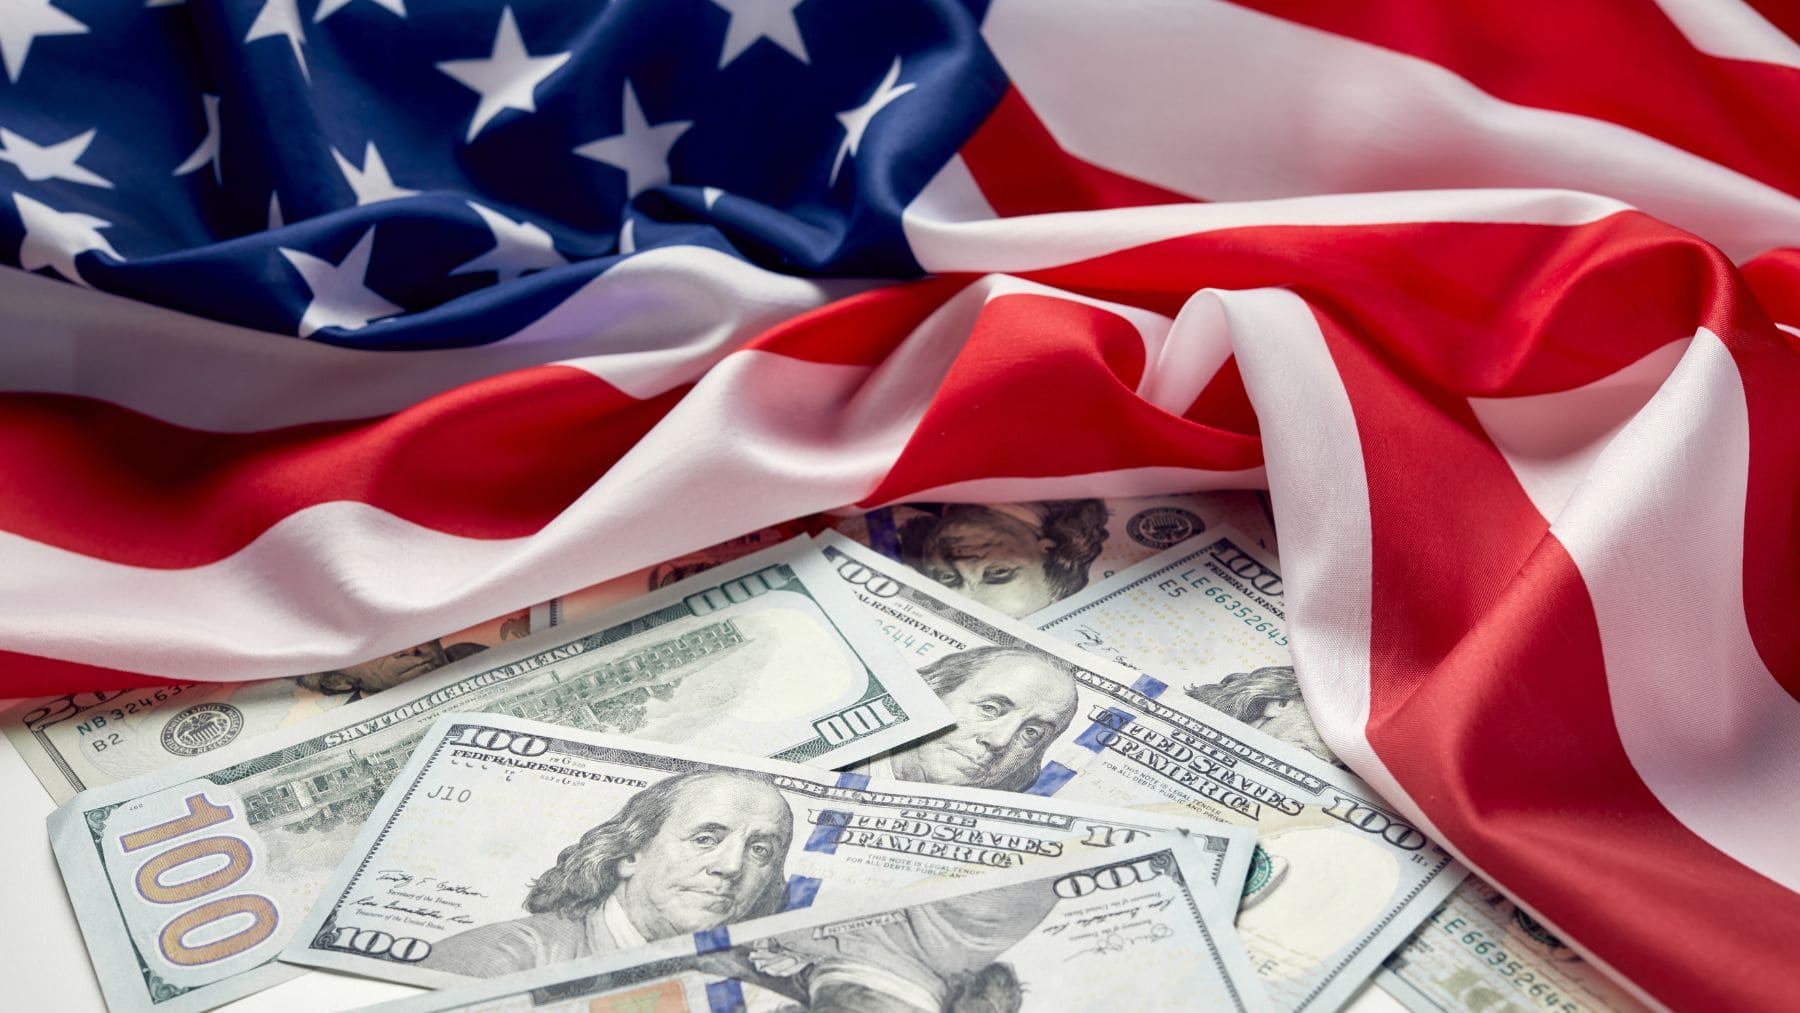 An American flag covering the Social Security money